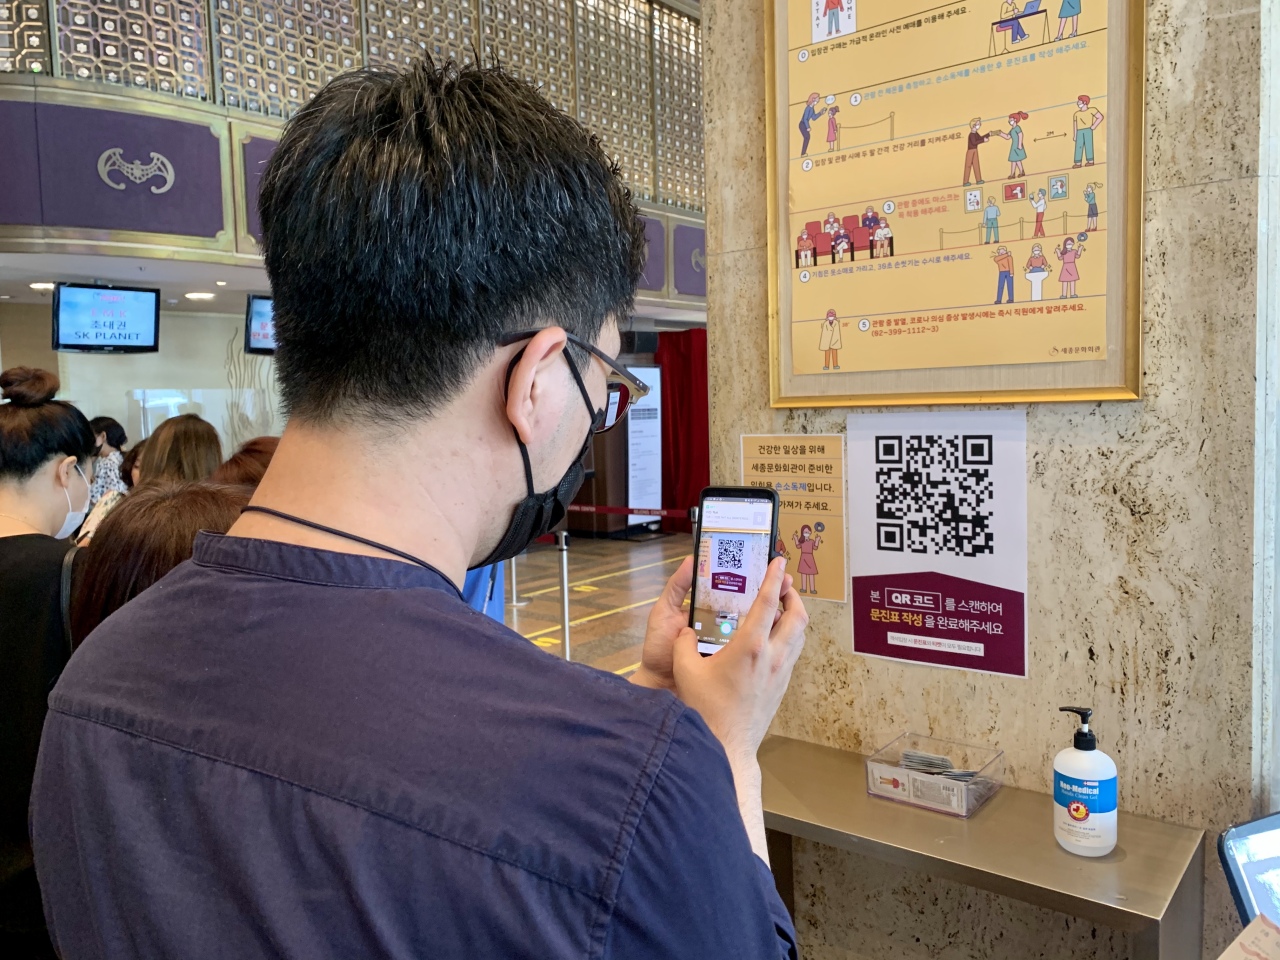 A theatergoer uses a QR code app to fill out a health check form on Friday before entering the concert hall to see “Mozart!” at the Sejong Center for the Performing Arts in Gwanghwamun, central Seoul. (Im Eun-byel/The Korea Herald)